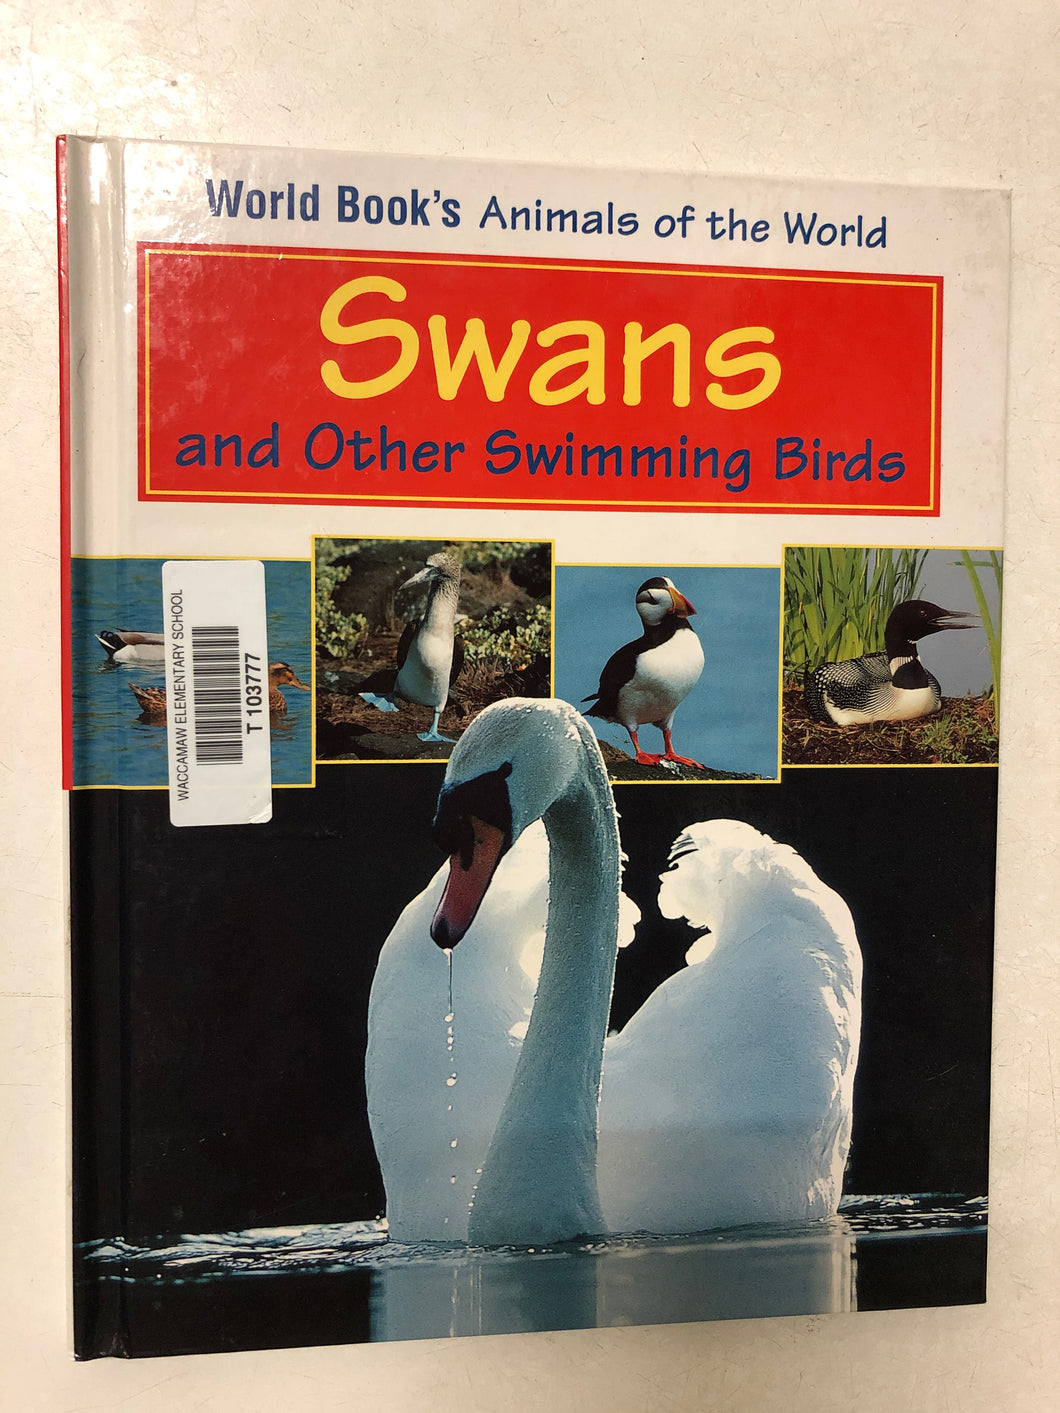 Swans and Other Swimming Birds - Slick Cat Books 